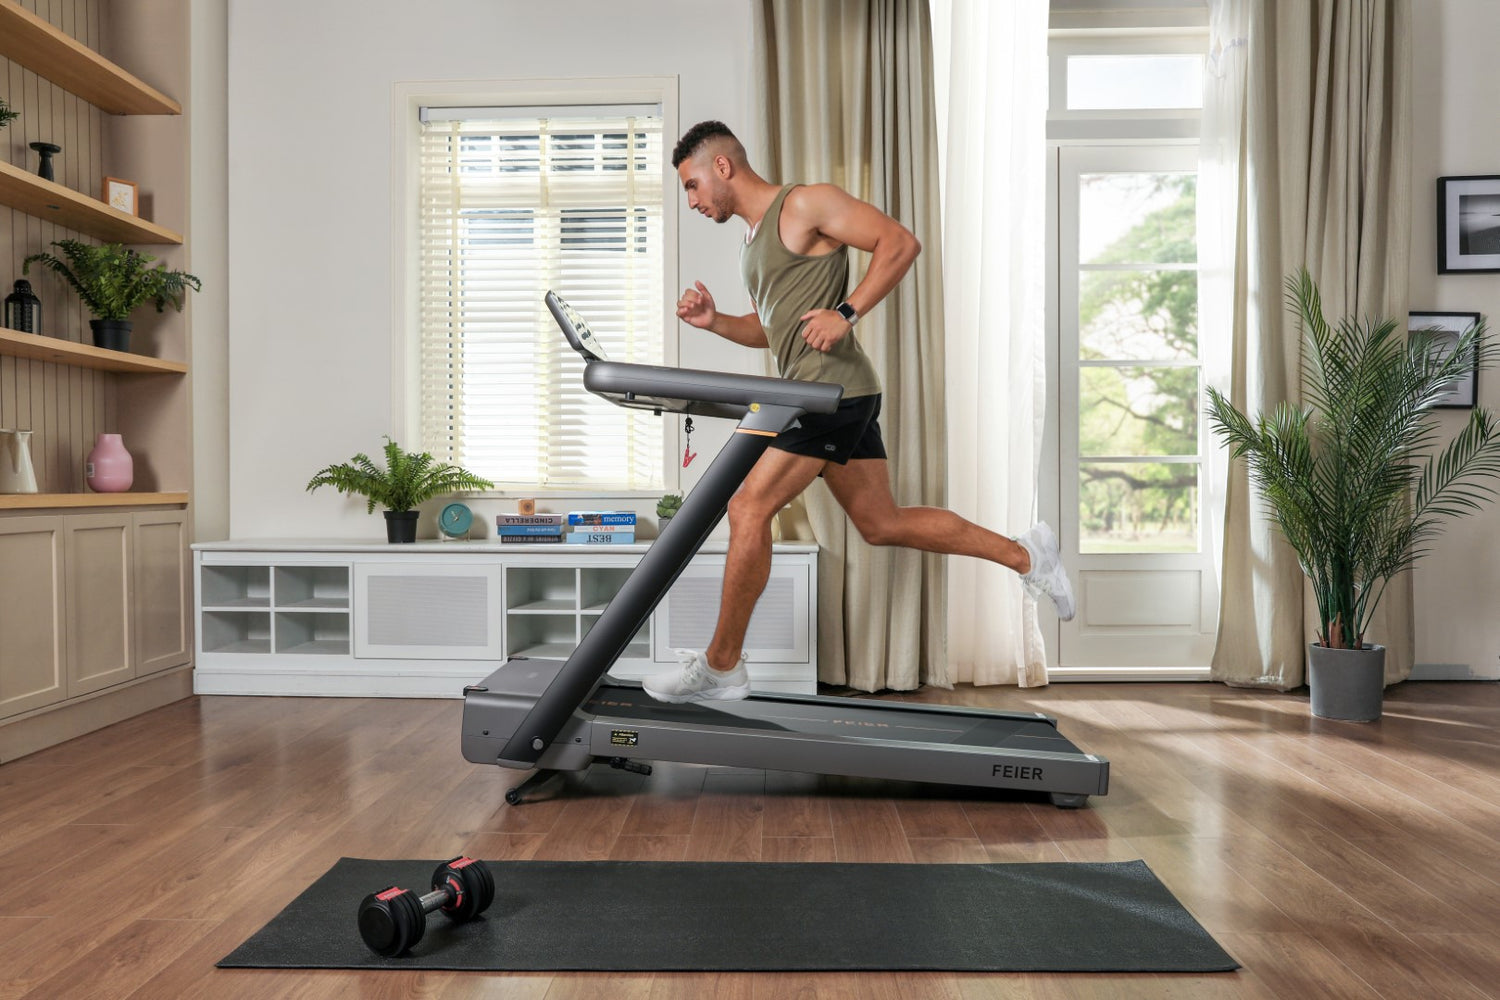 A man uses a Feier Star 100 with an incline and speed-adjustable treadmill at home